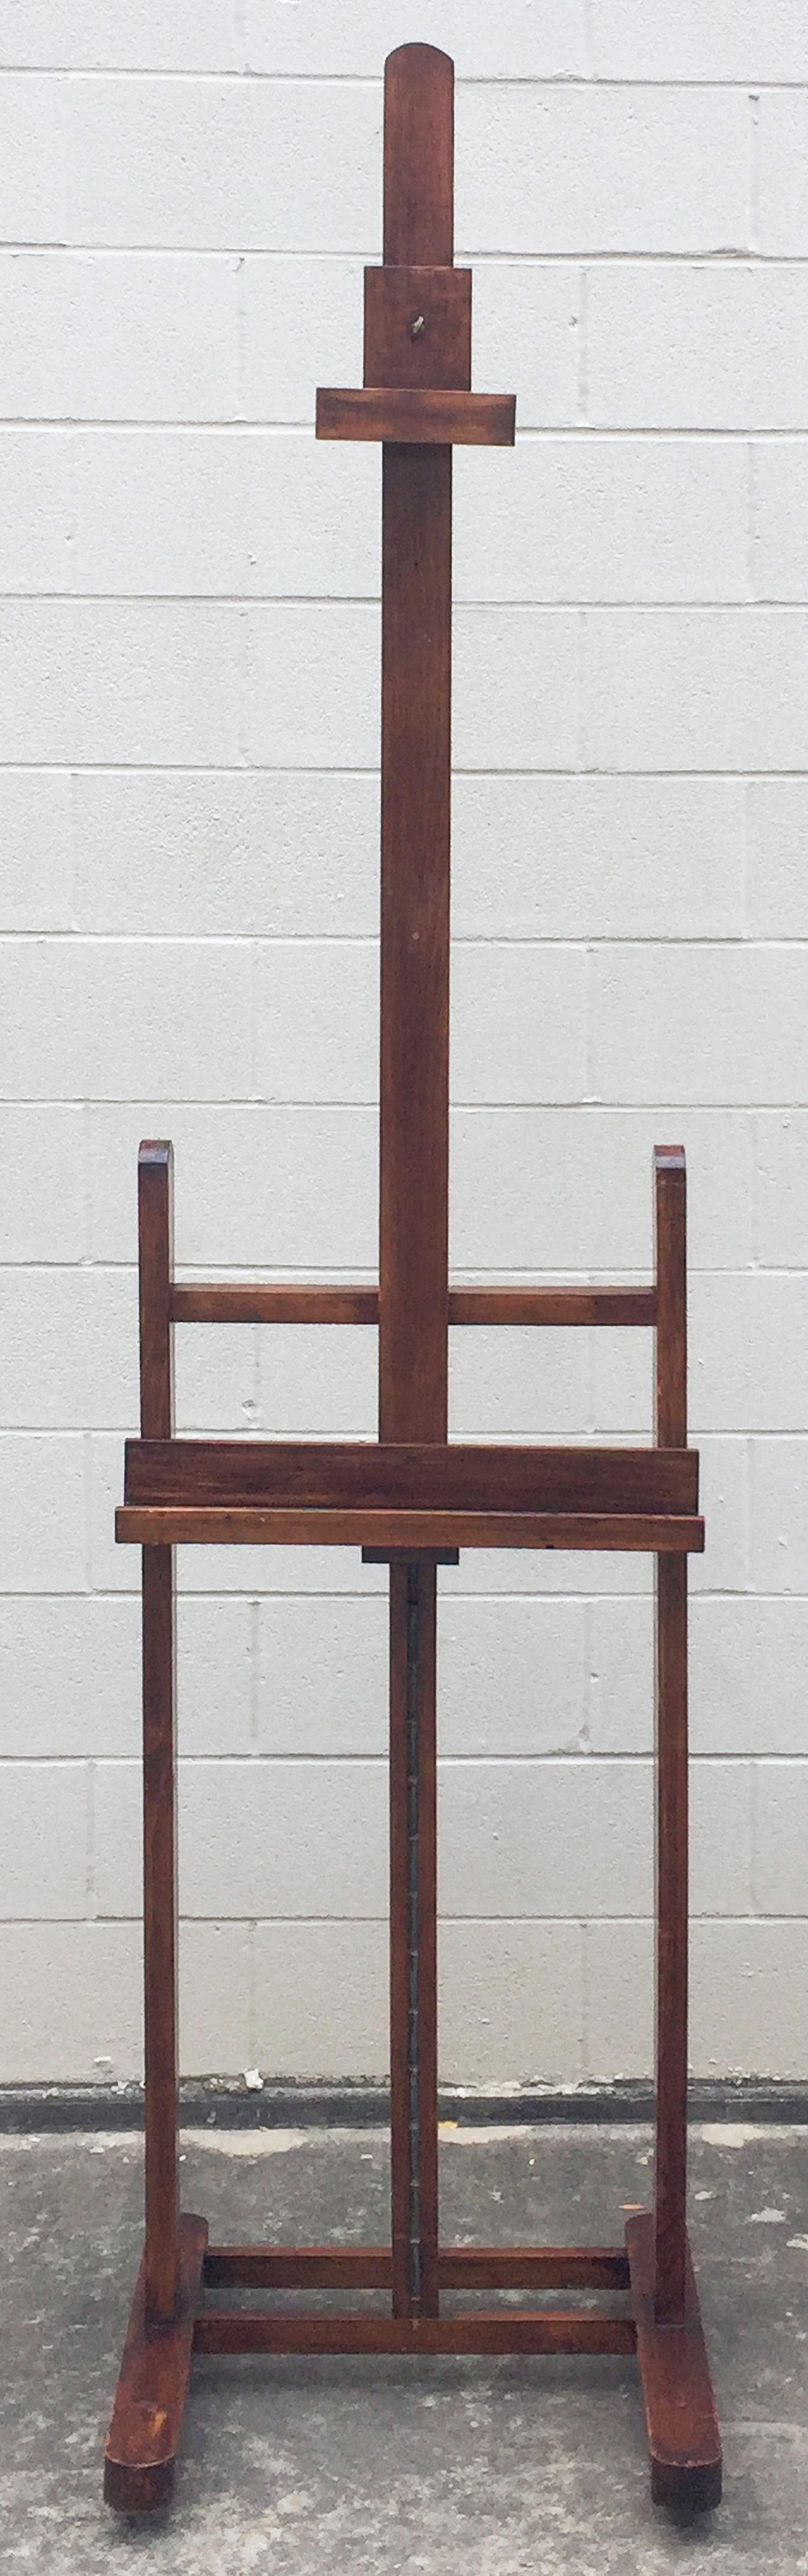 20th Century Large English Artist's Display or Floor Easel with Adjustable Tray